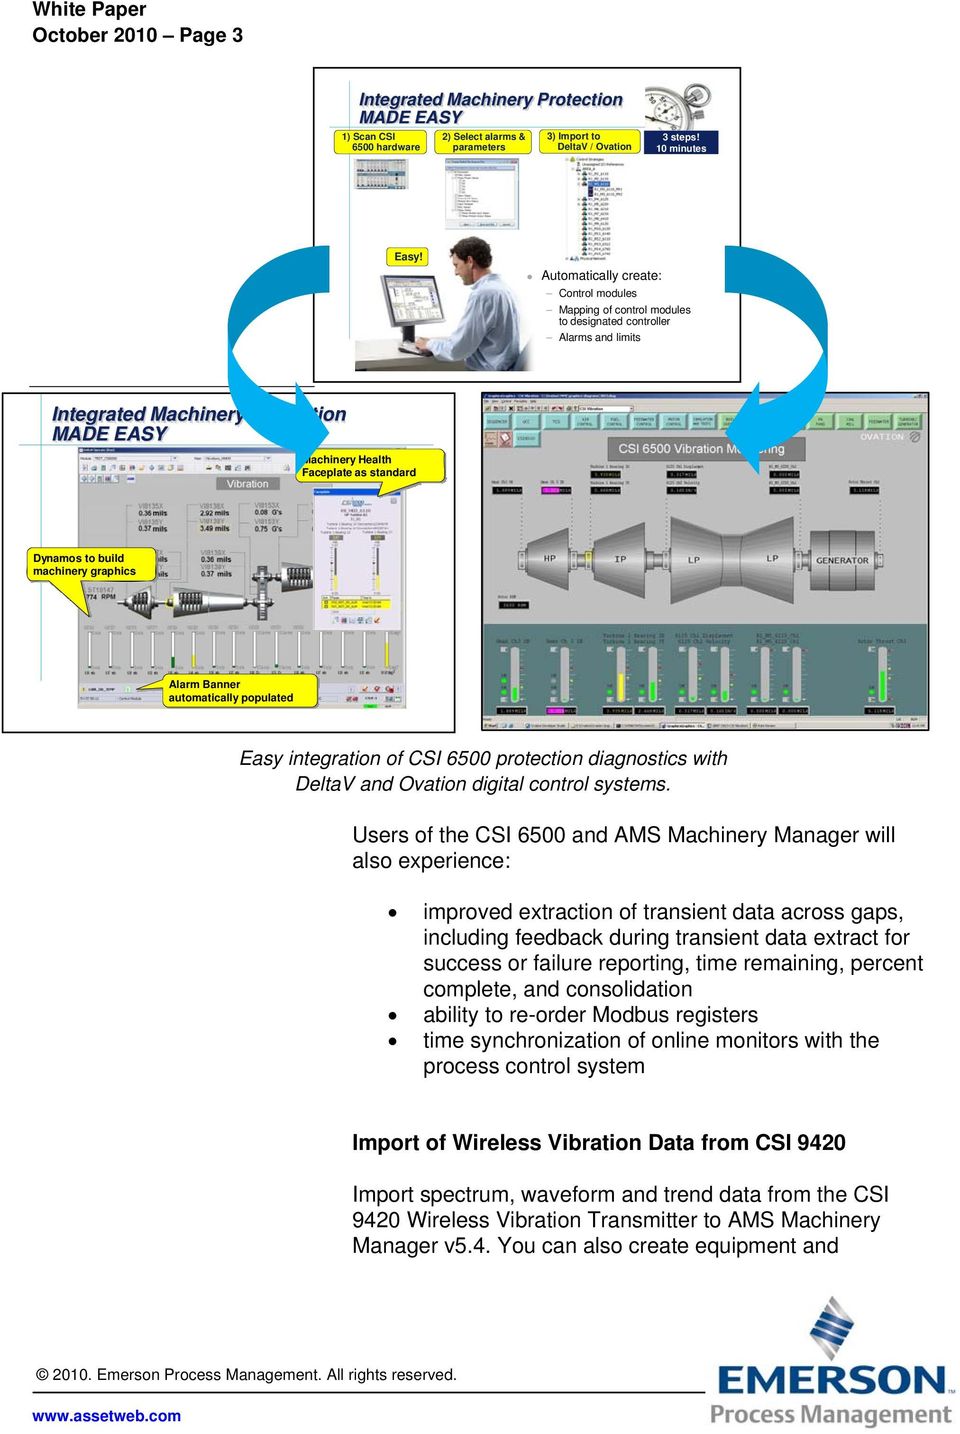 build machinery graphics Alarm Banner automatically populated Easy integration of CSI 6500 protection diagnostics with DeltaV and Ovation digital control systems.